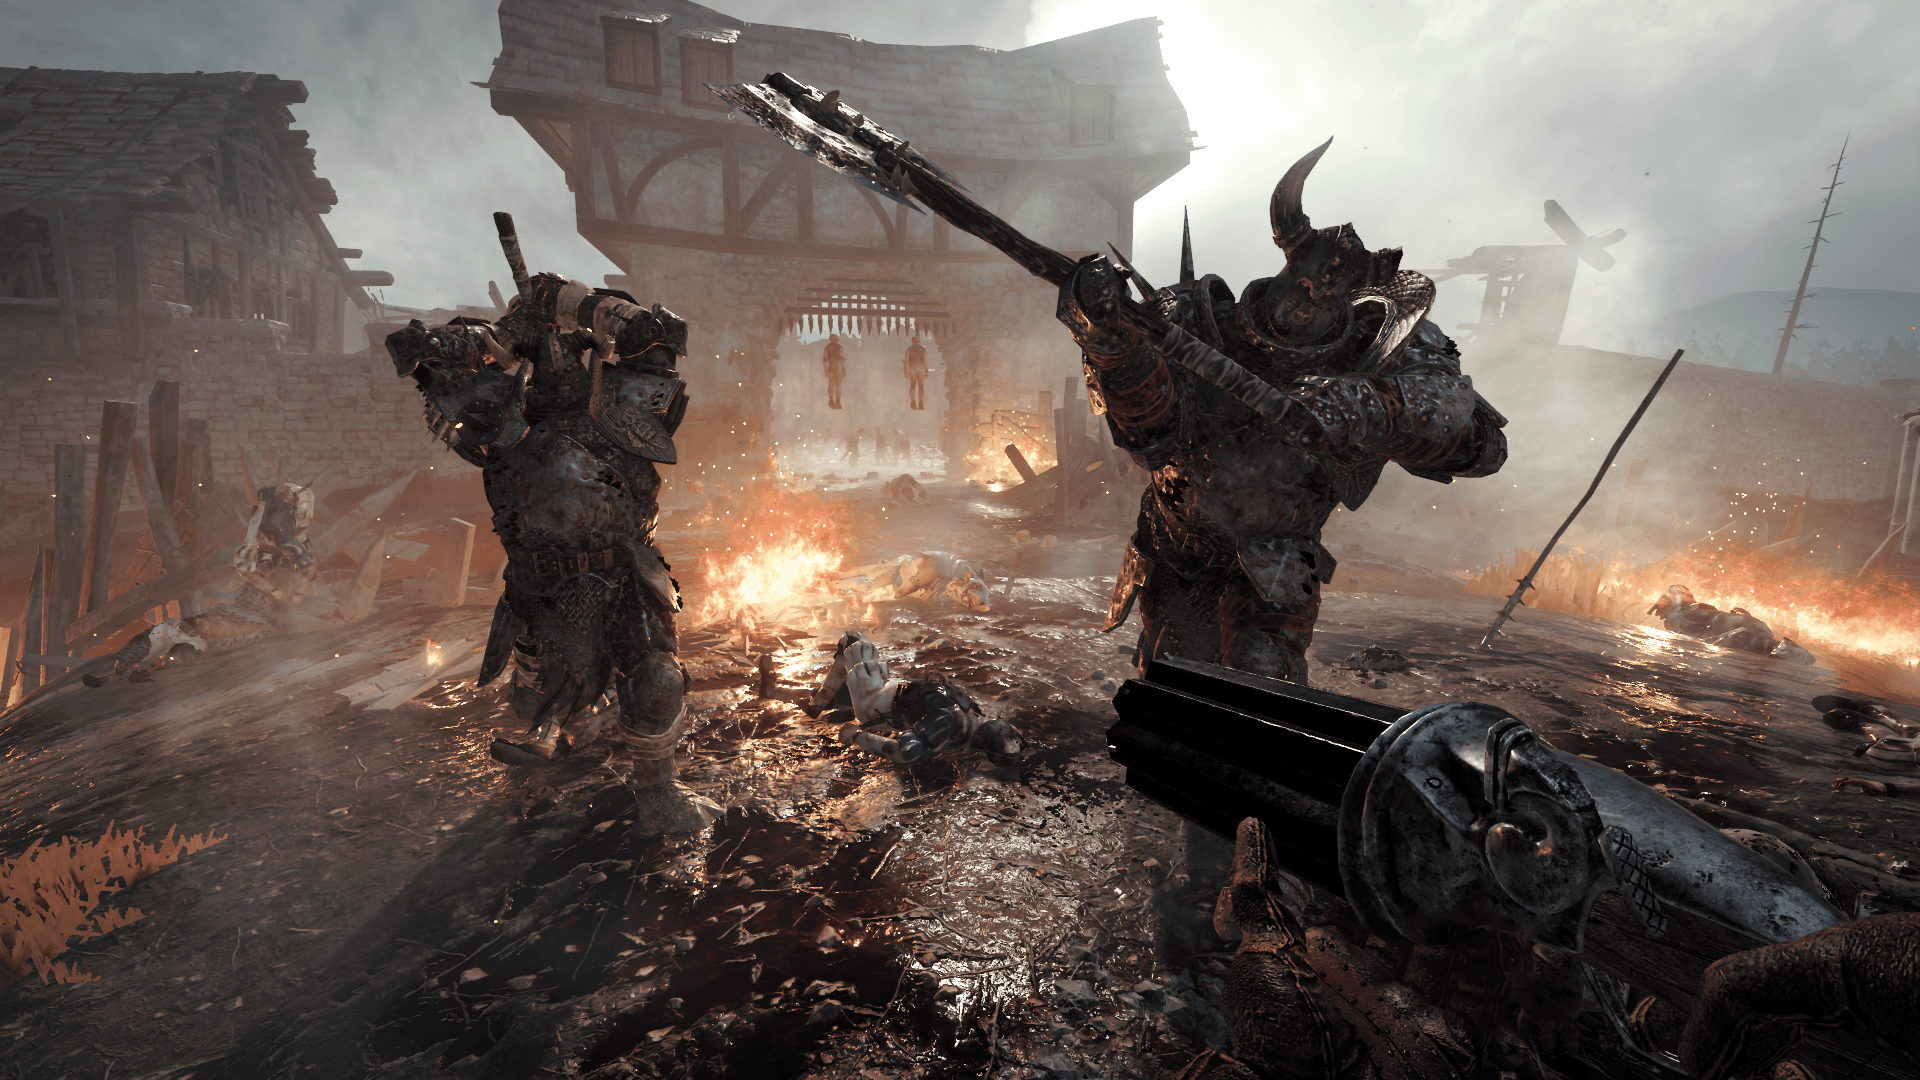 WARHAMMER: VERMINTIDE 2 BETA ROLLING OUT ON STEAM THIS WEEKEND